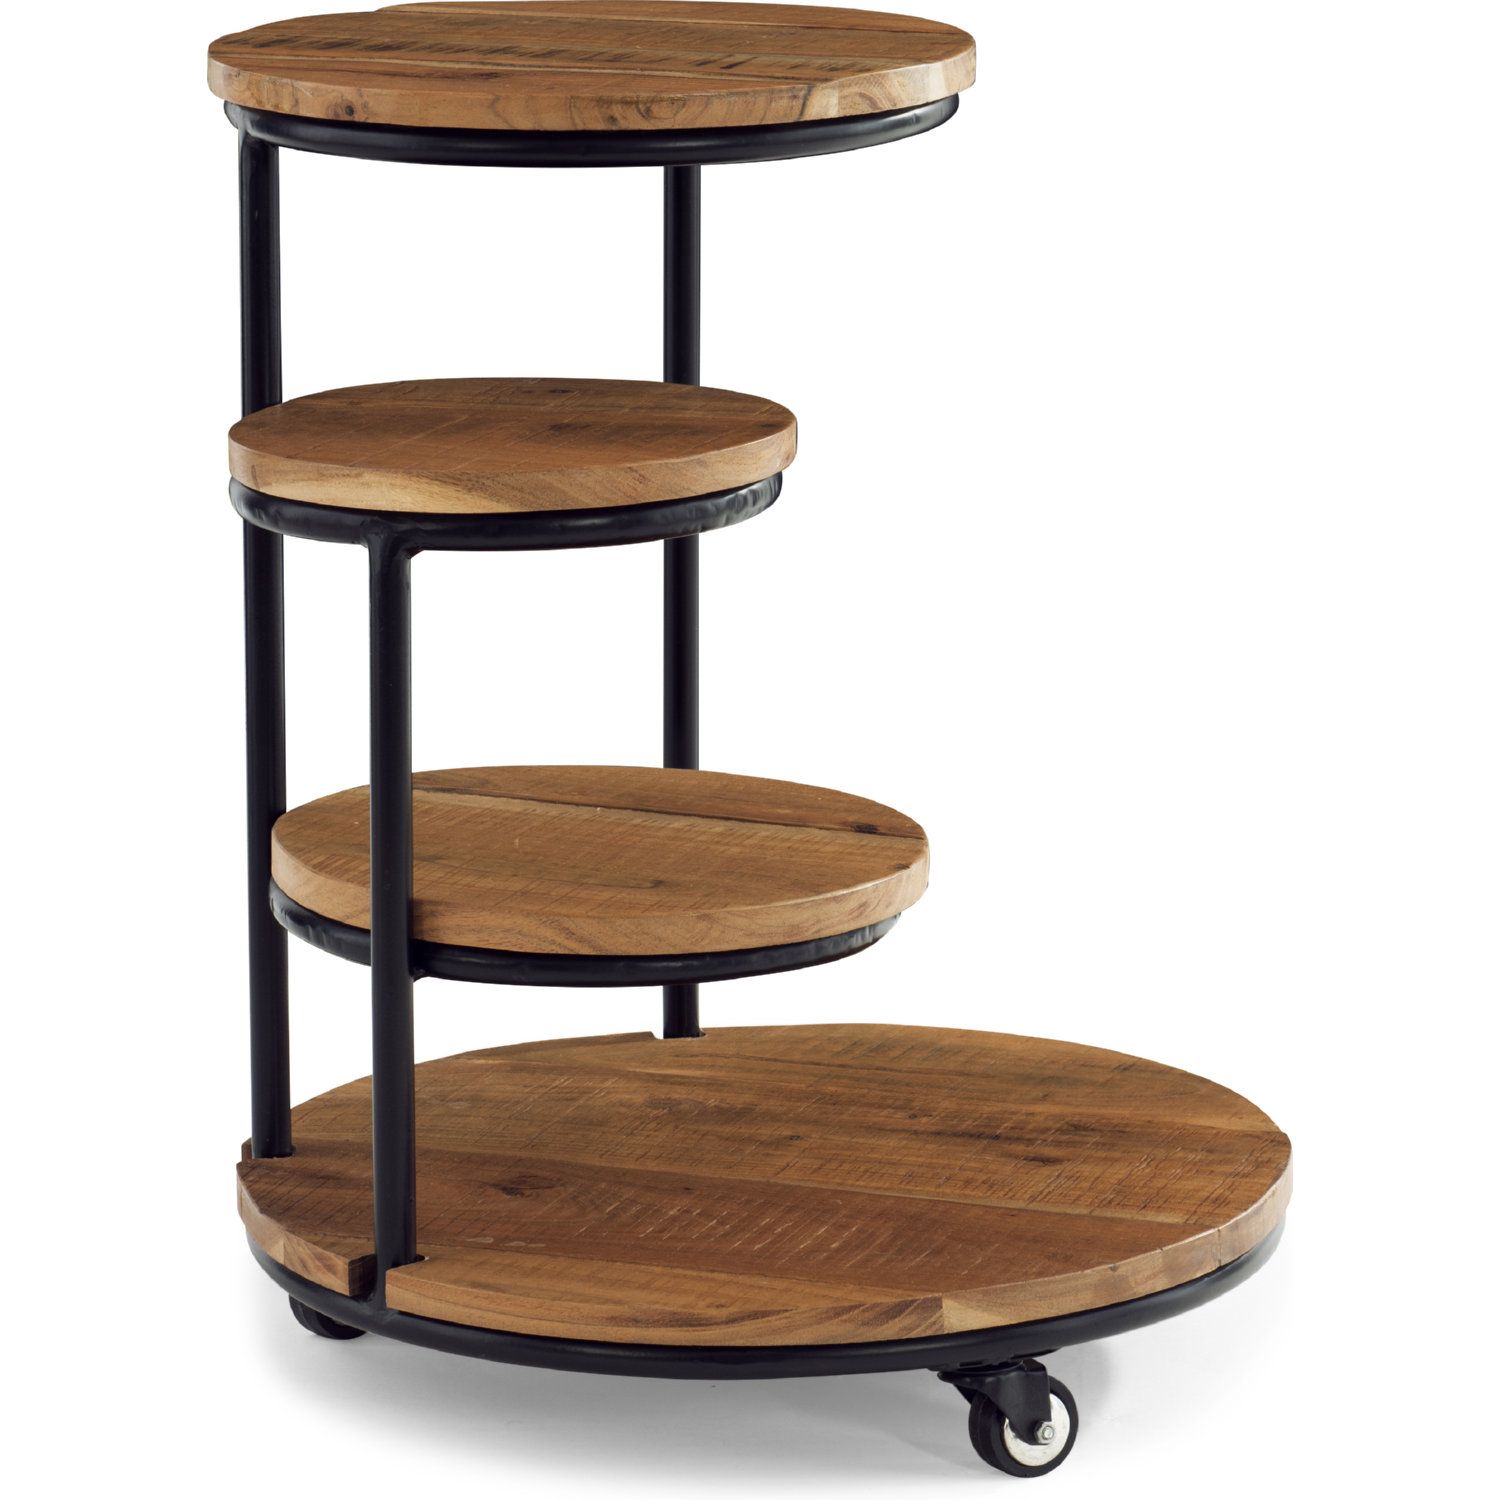 Powell D1247a19ps Collis 4 Tiered Plant Stand W/ Wheels In Wood & Black With 4 Tier Plant Stands (View 10 of 15)